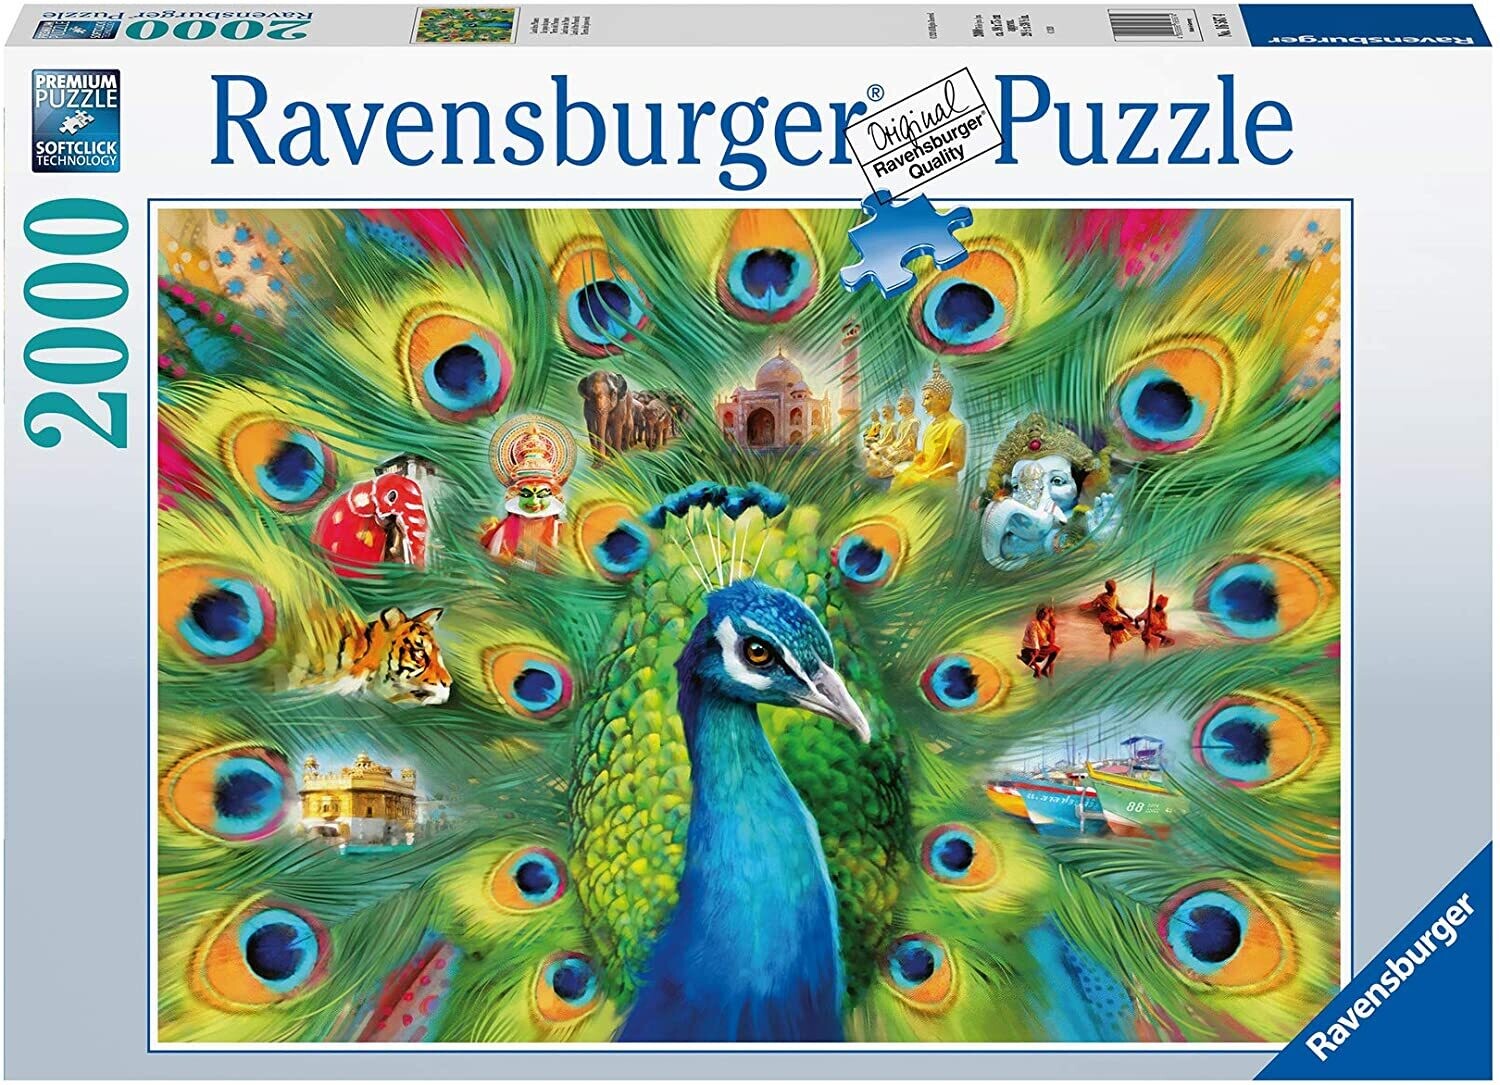 Ravensburger 16567 Land of the Peacock Puzzle